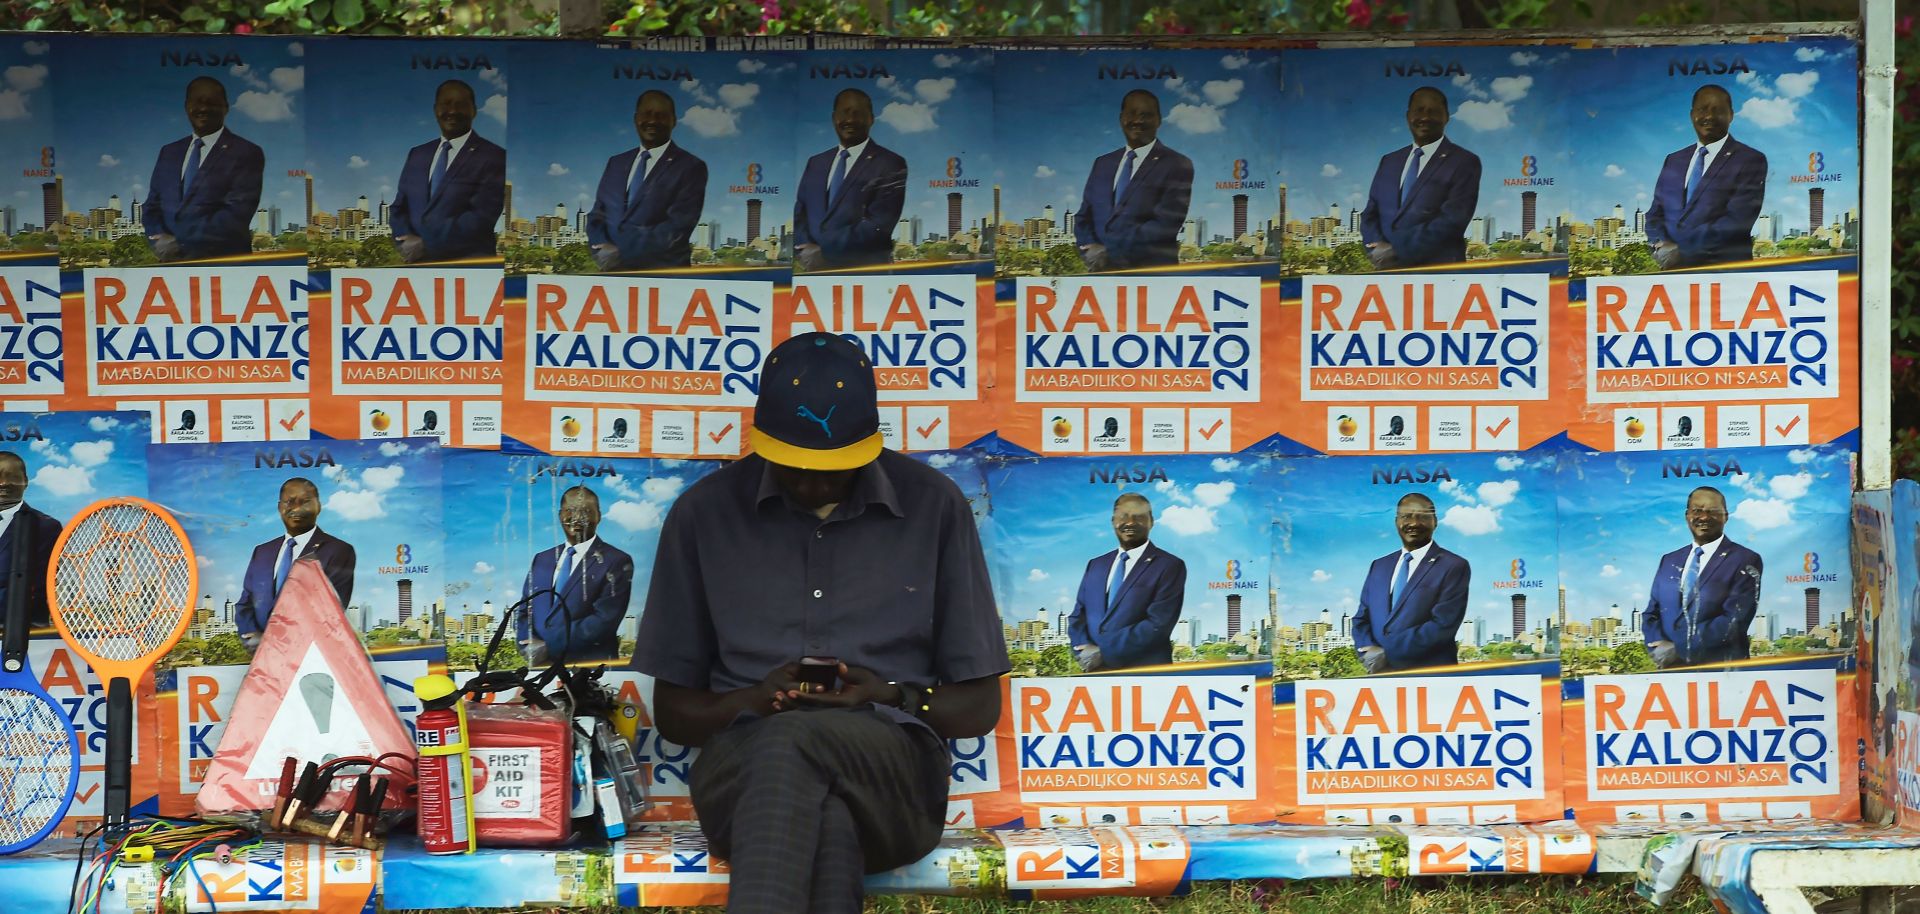 Violence was rampant in the aftermath of Kenya's 2007 presidential election. 